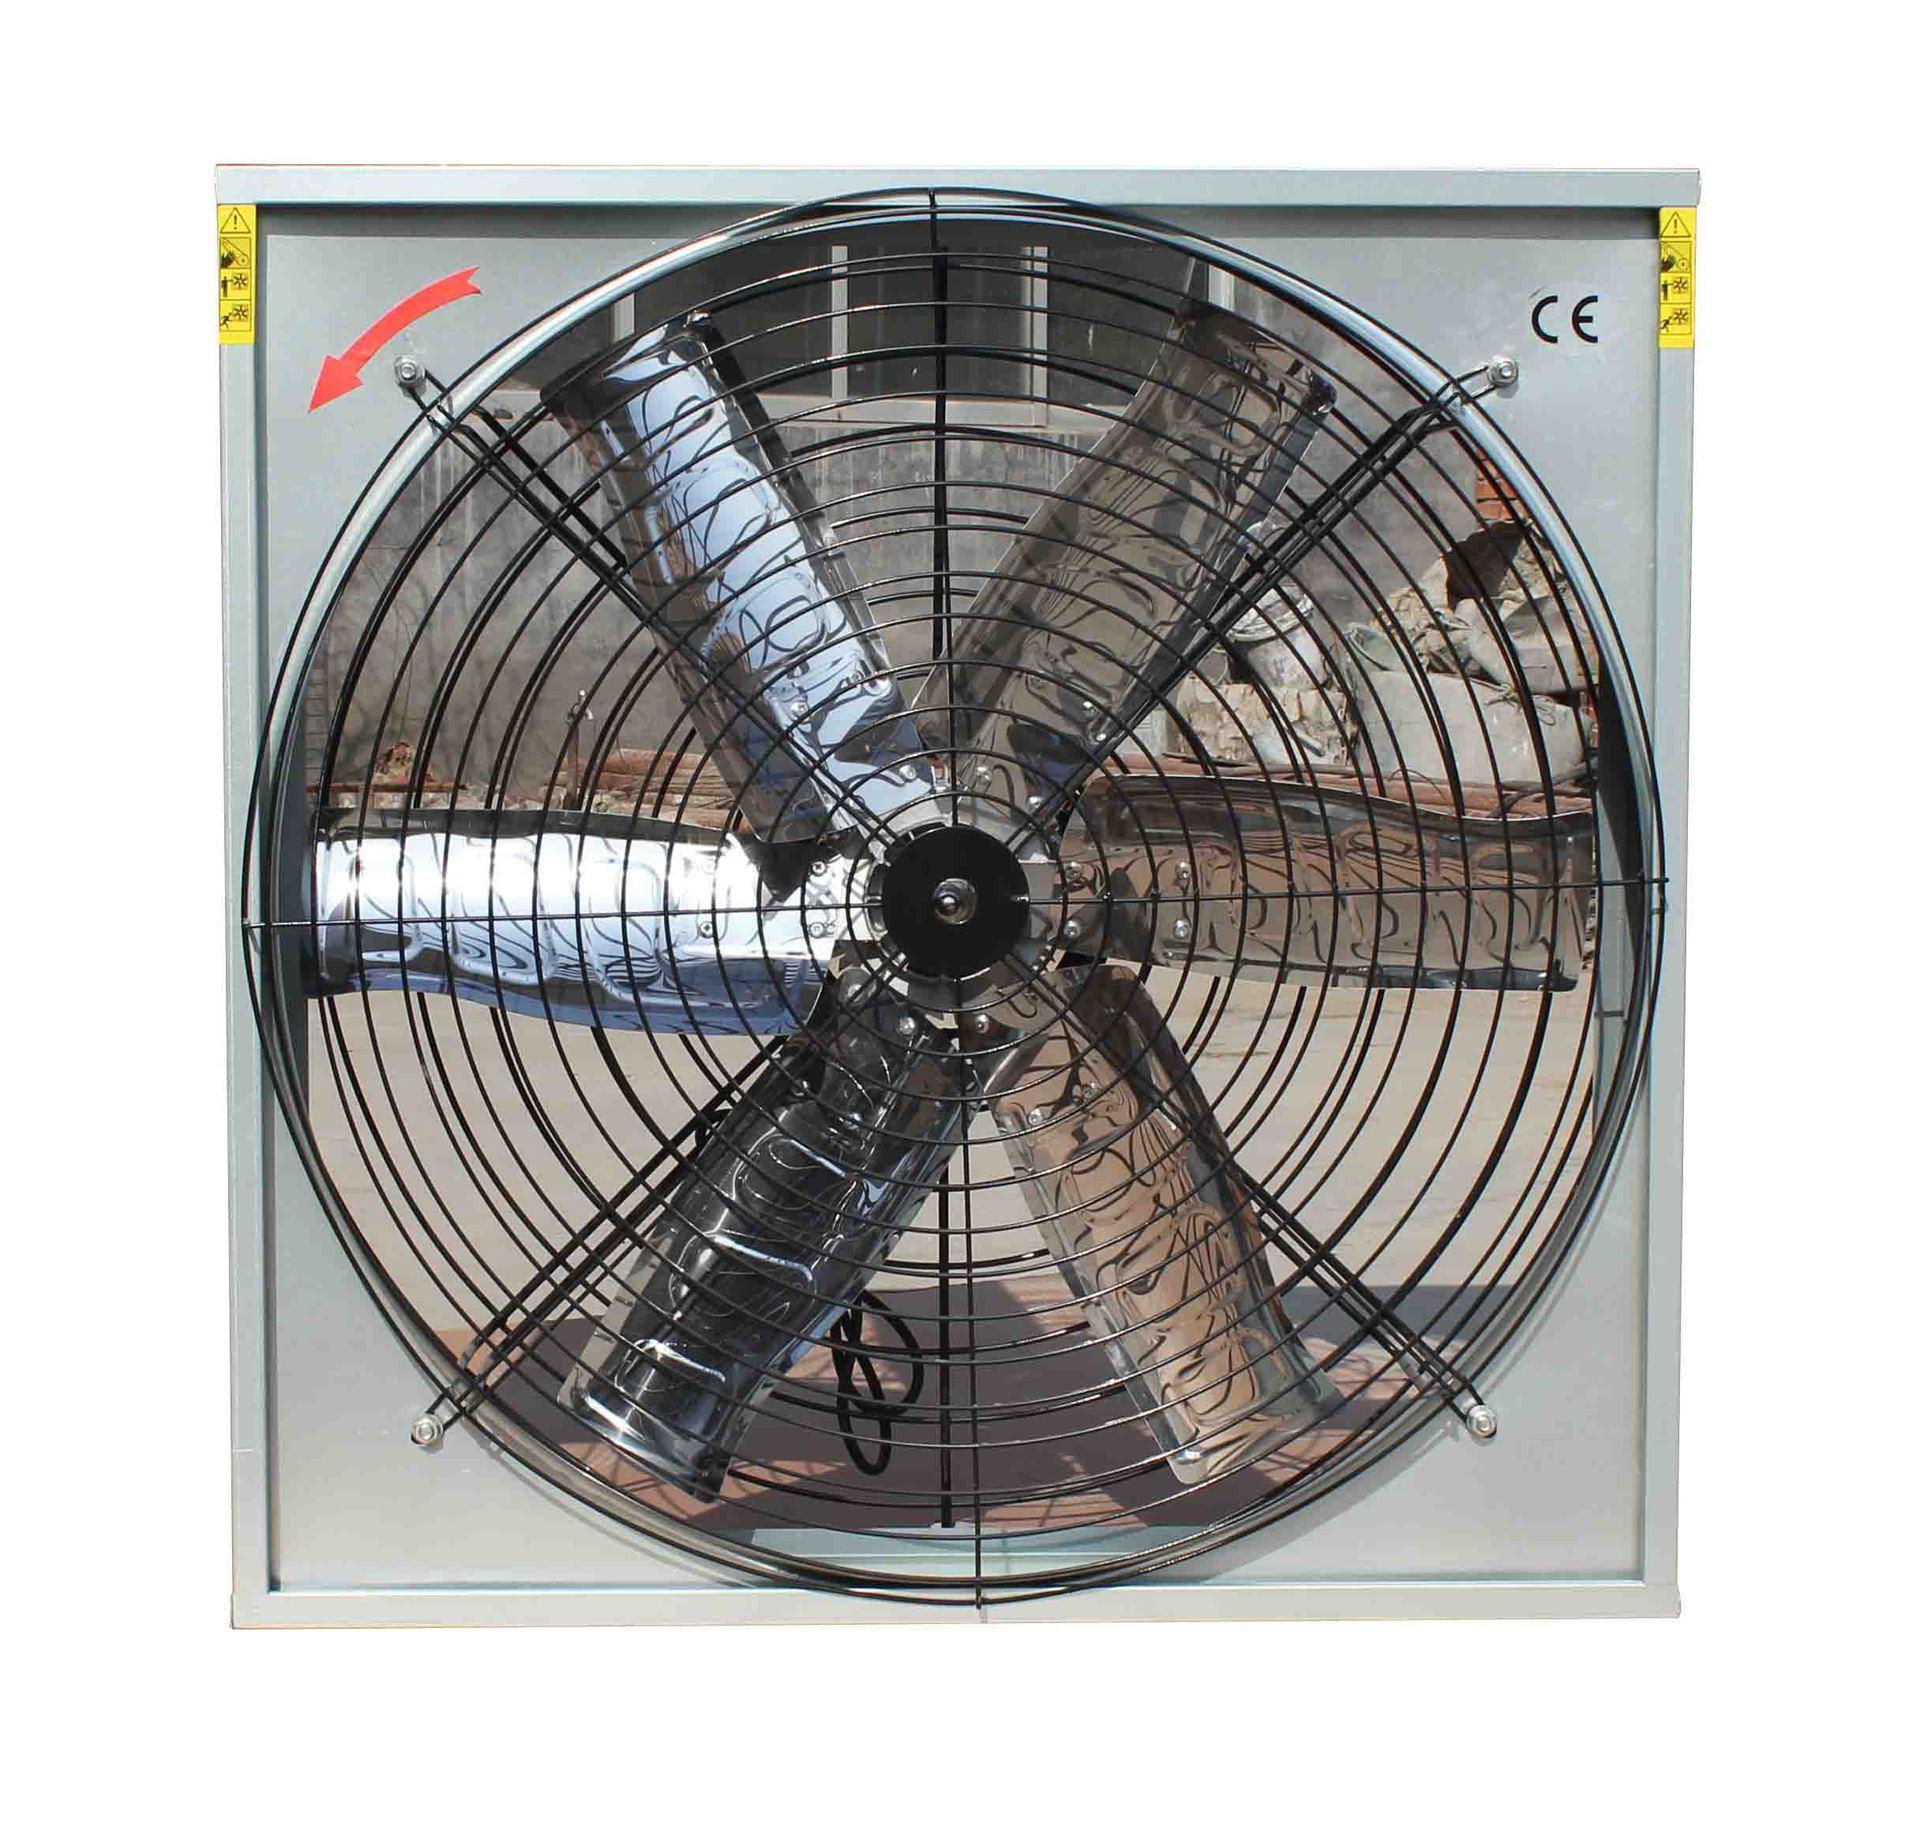 China Factory Directly Supply 3phase / Single Phase Ventilation Exhaust Fan